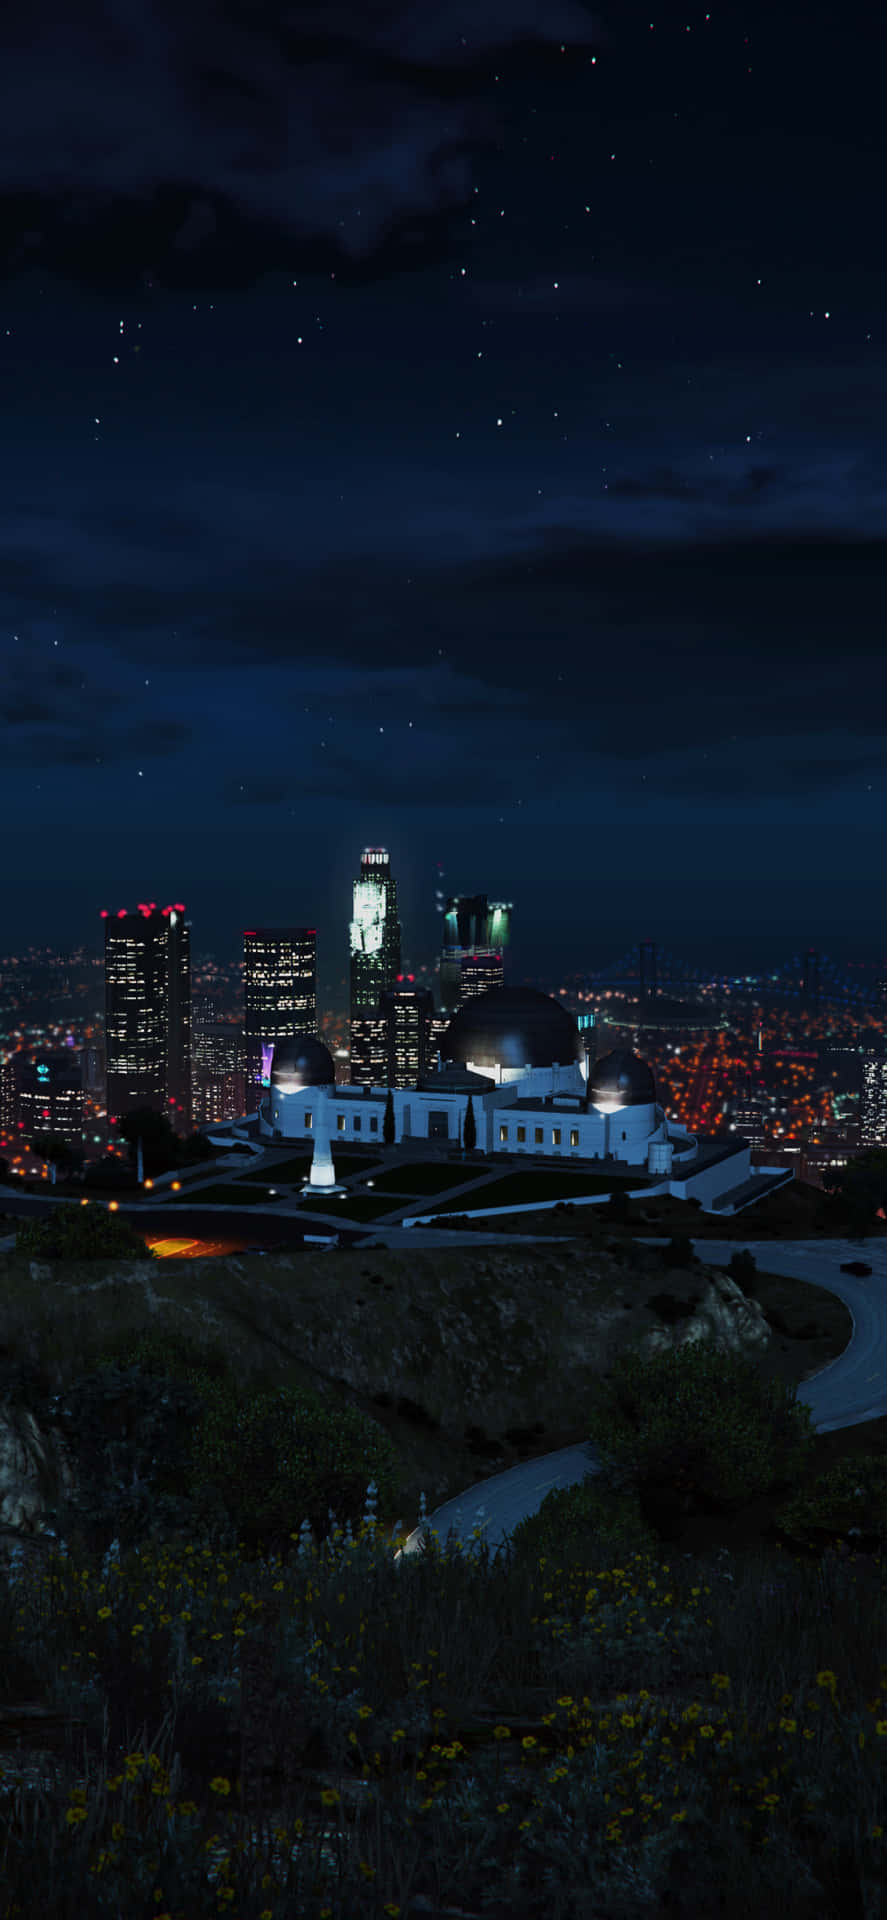 Iphone Xs Max Grand Theft Auto V Background Los Santos At Night Time